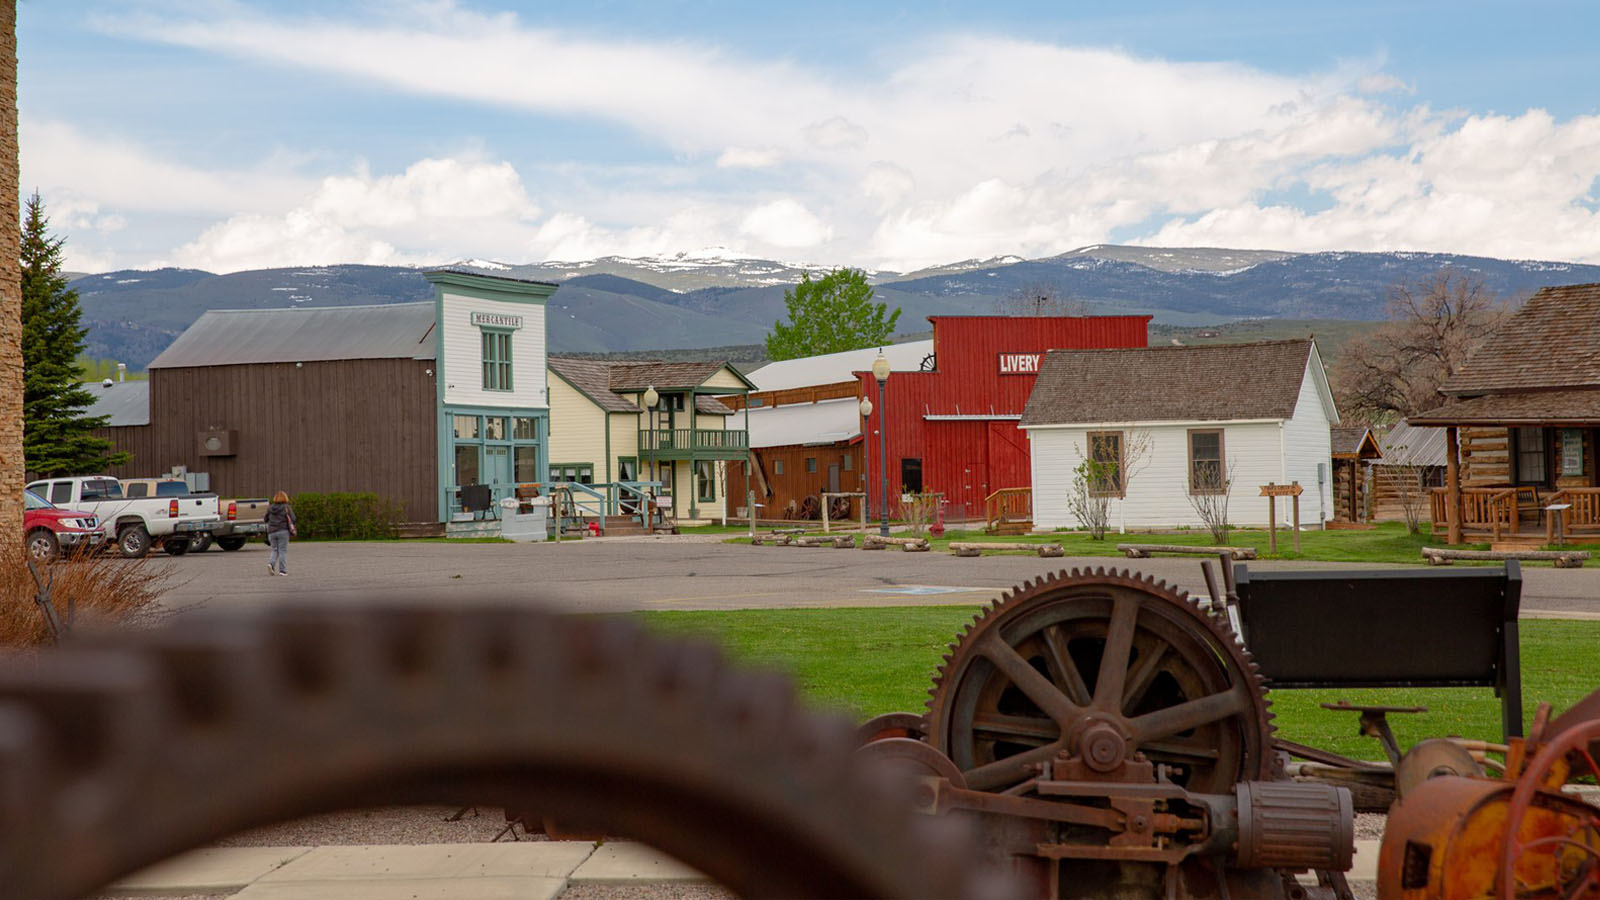 The Museum of the American West is a lively destination for kids.